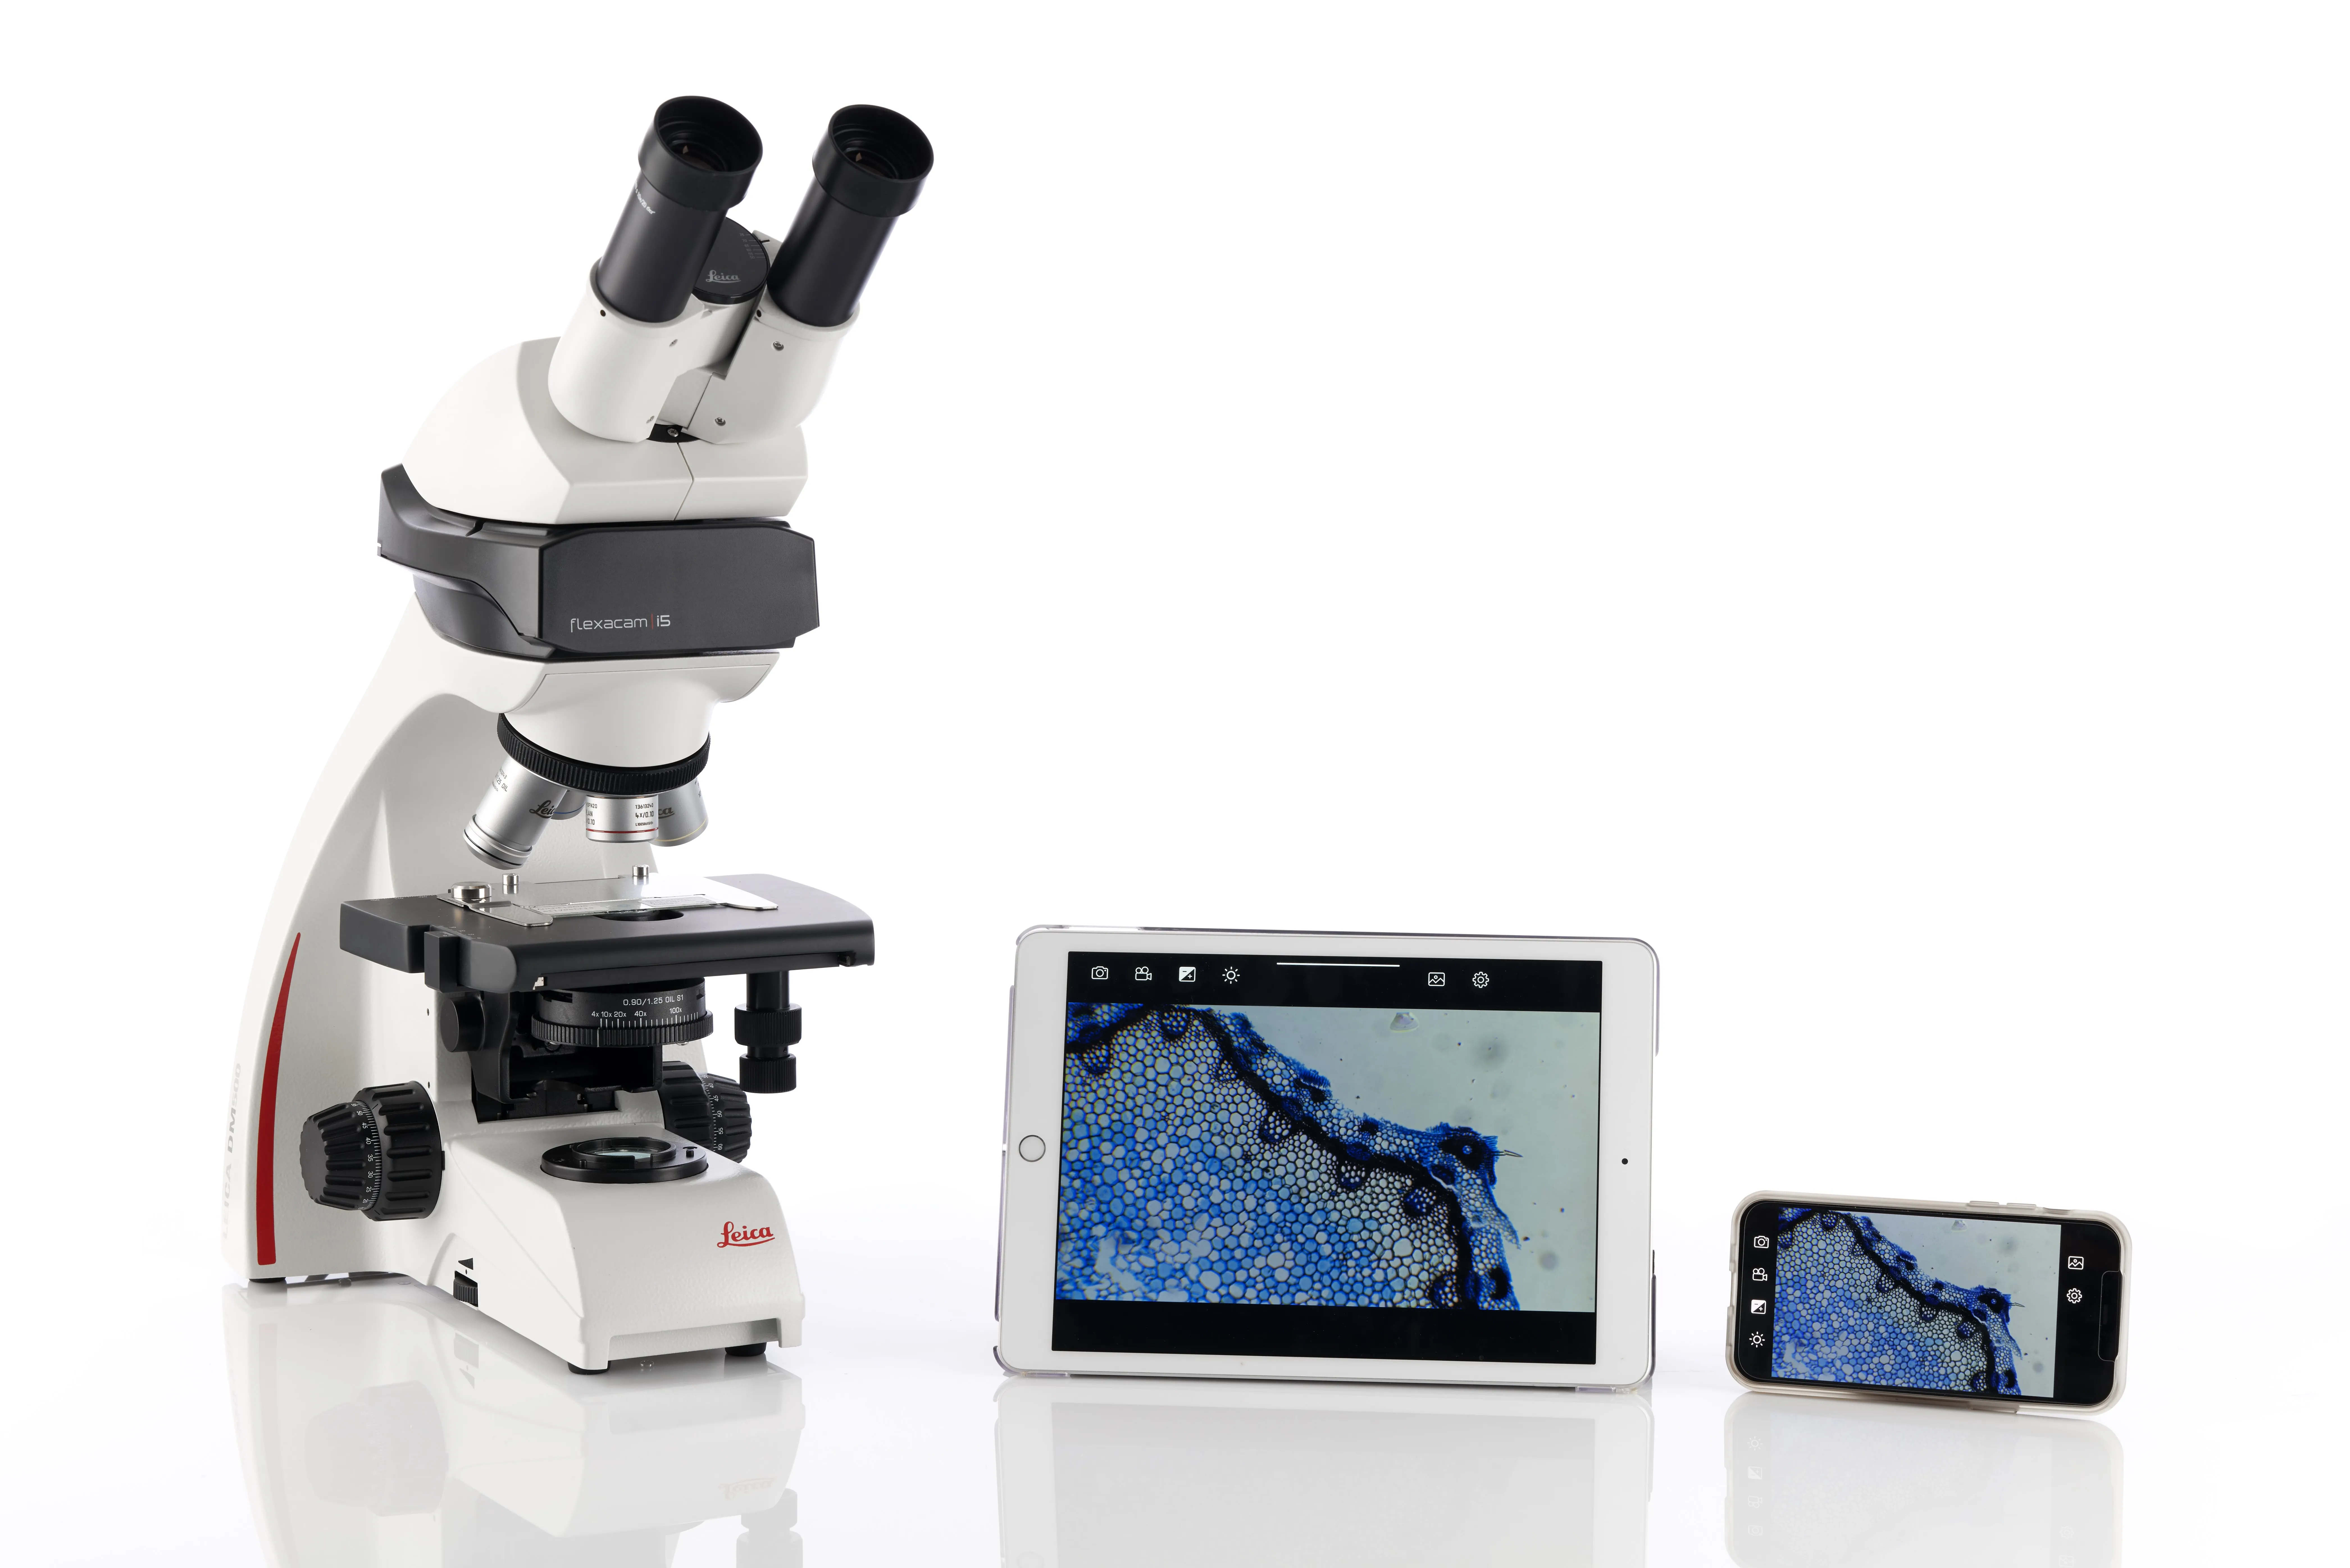 Leica DM500 Educational Microscope with Integrated Wireless Camera and Eyepiece Pointers